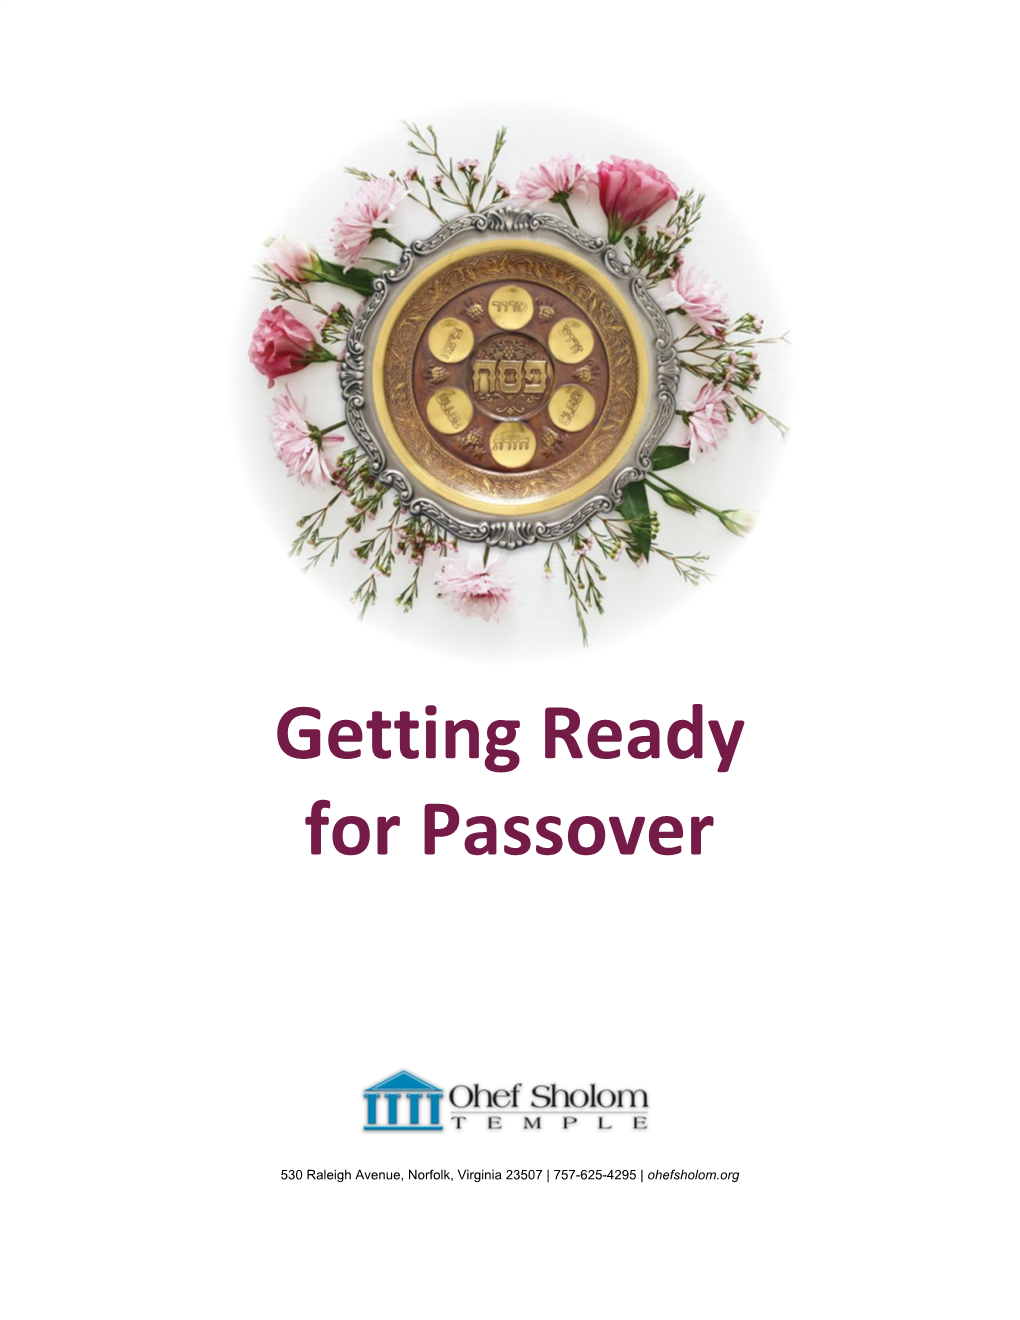 Getting Ready for Passover